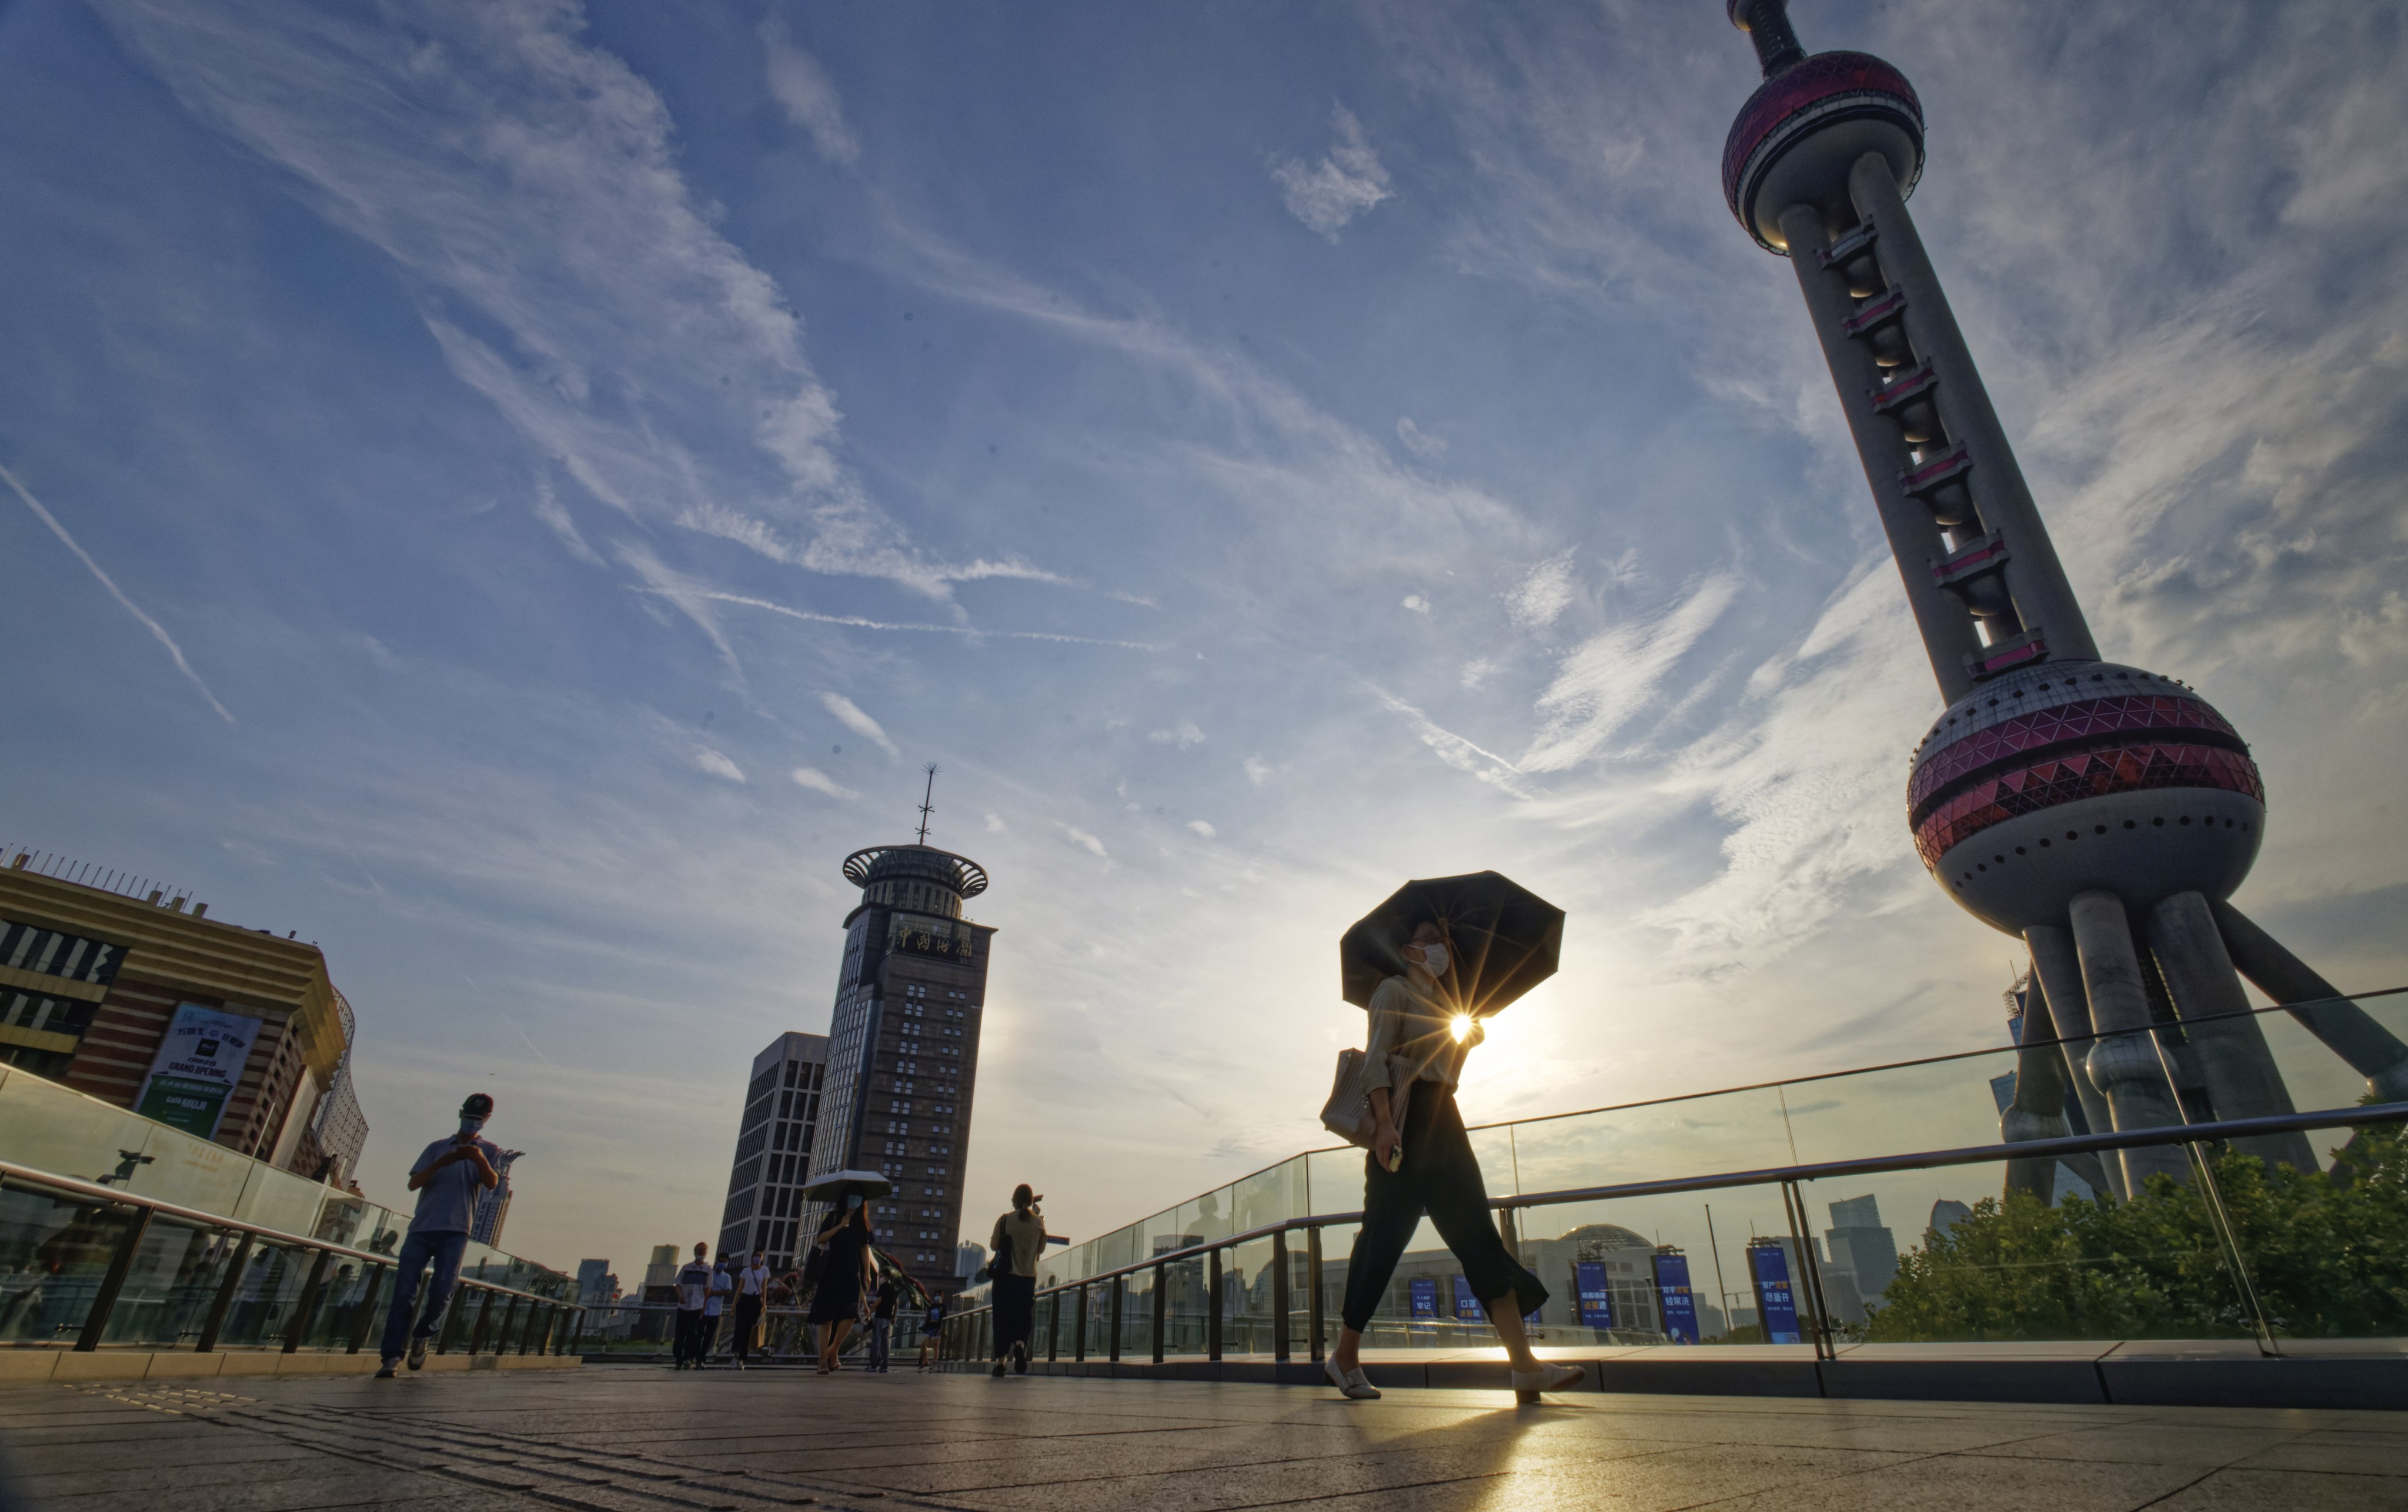 The Lujiazui financial district in Shanghai. A liquidity crisis in the trust industry could have far-reaching consequences for the broader economy, say analysts. Photo: EPA-EFE